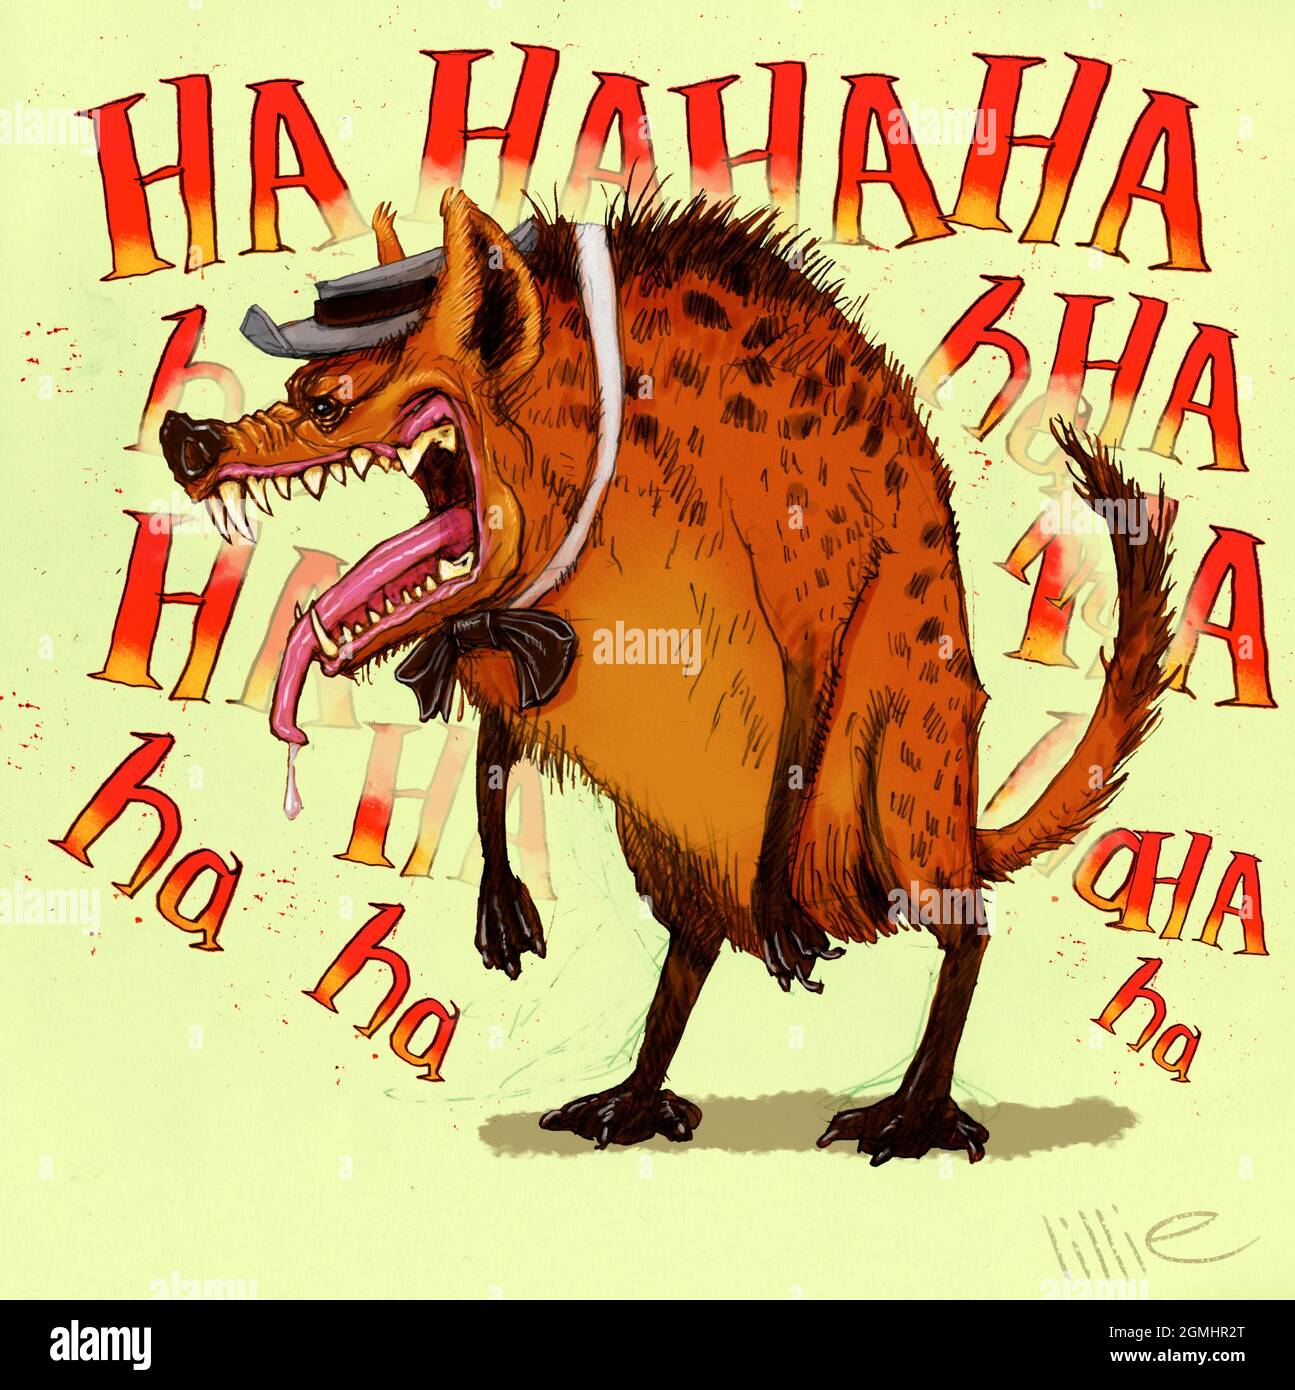 Cartoon, funny humorous art work of an anthropomorphized, laughing hyena wearing a Homberg hat and bow-tie. Would suit greetings cards, posters, books Stock Photo